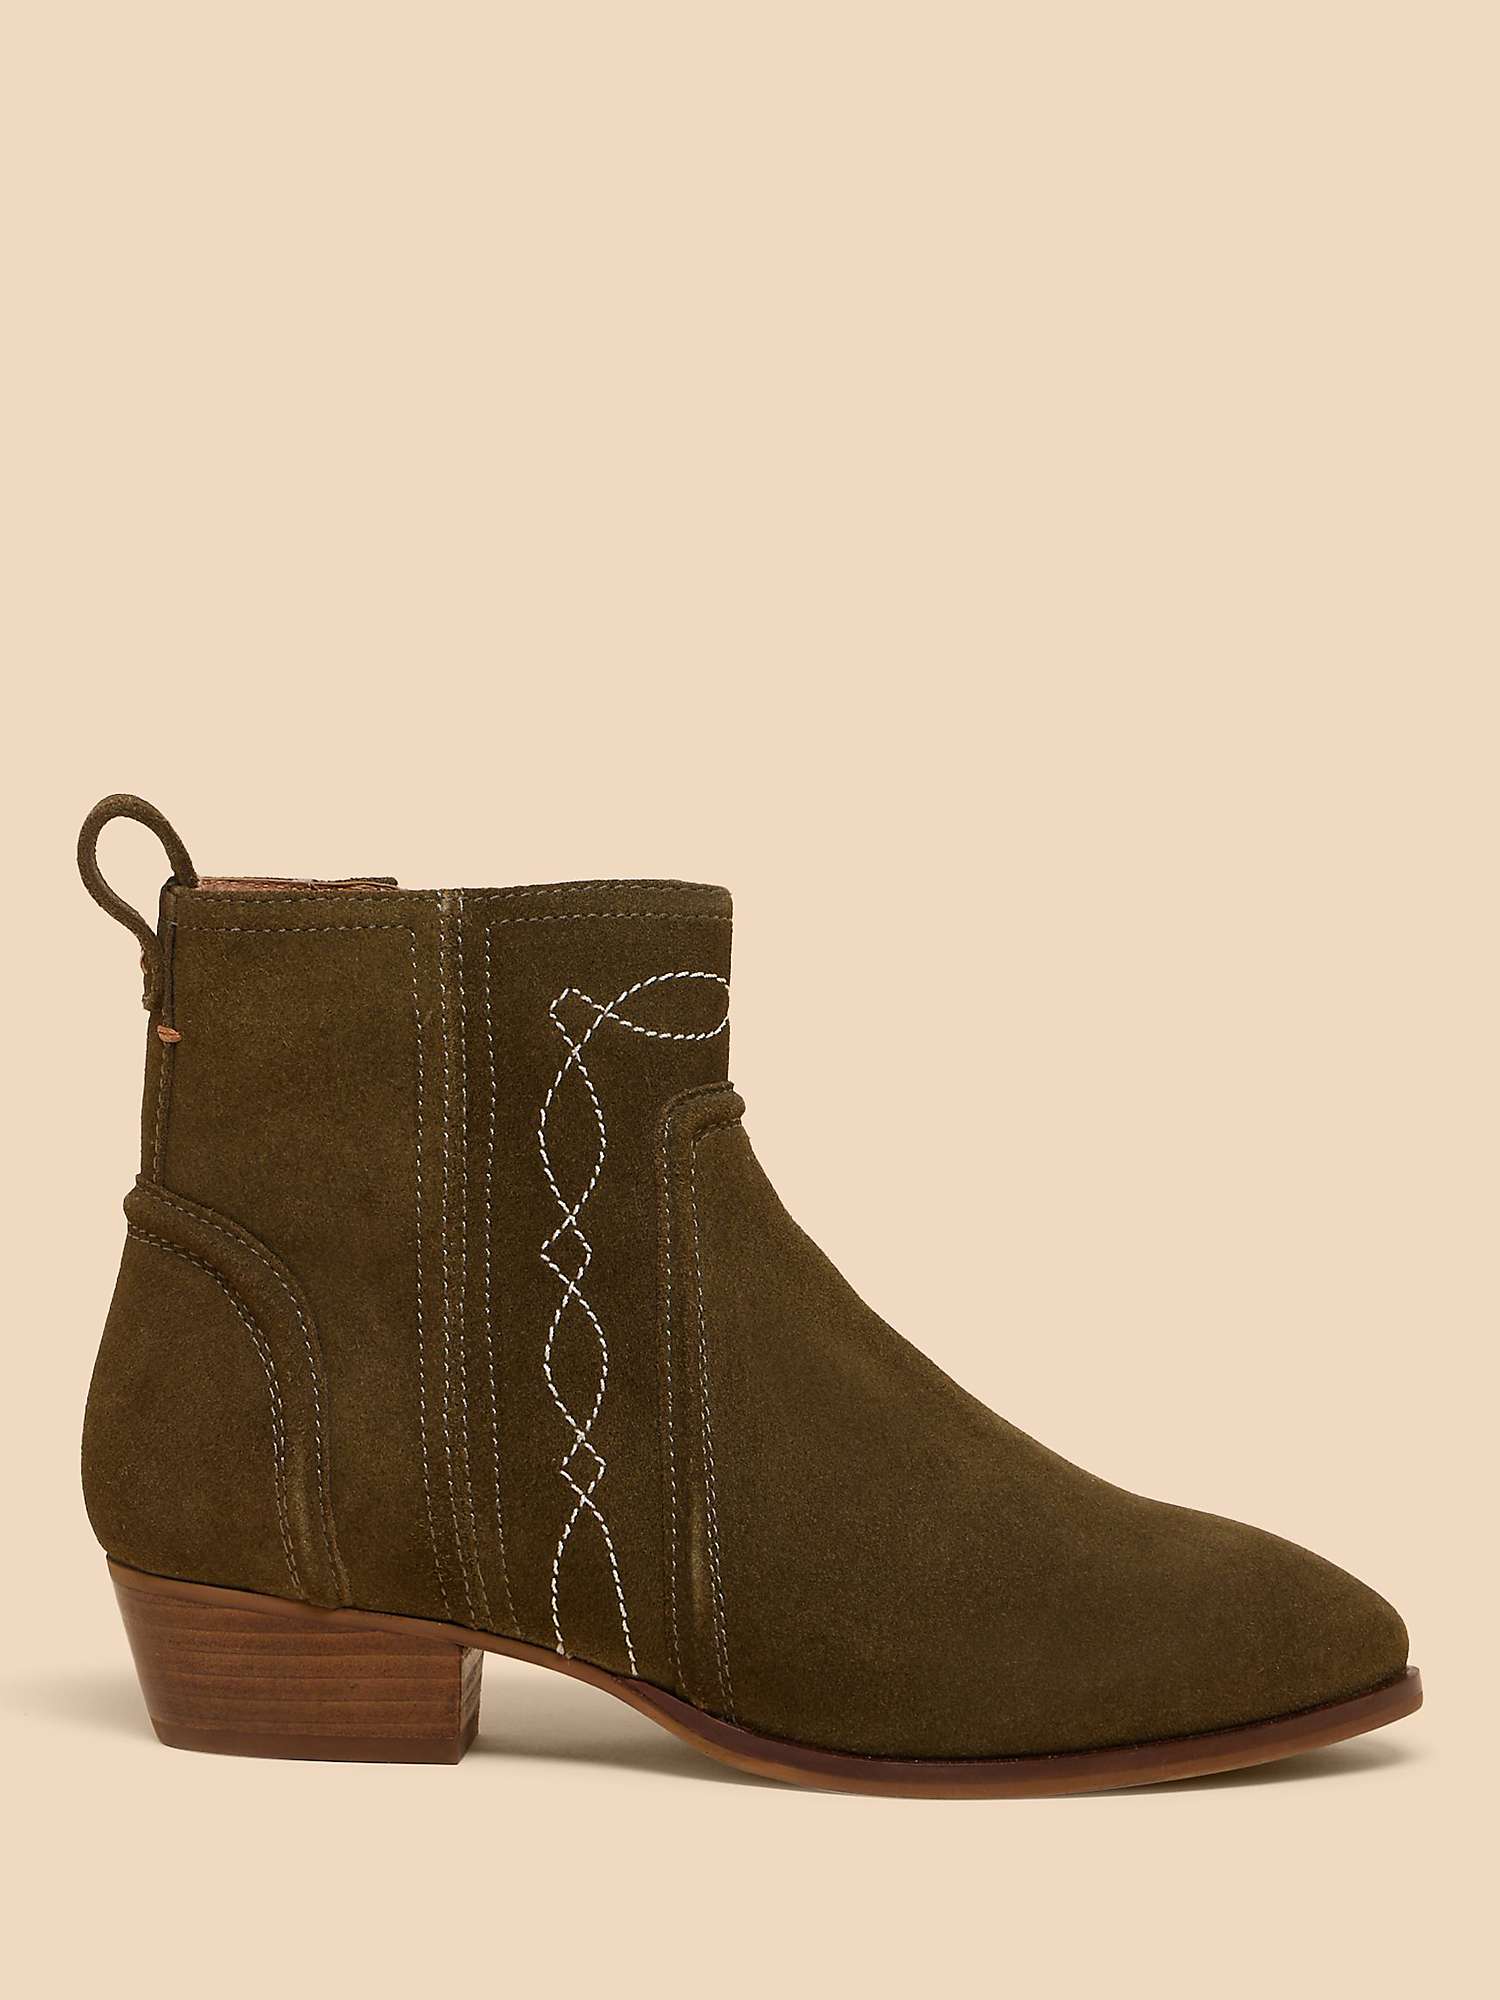 Buy White Stuff Cedar Suede Embroidered Boot, Khaki Online at johnlewis.com